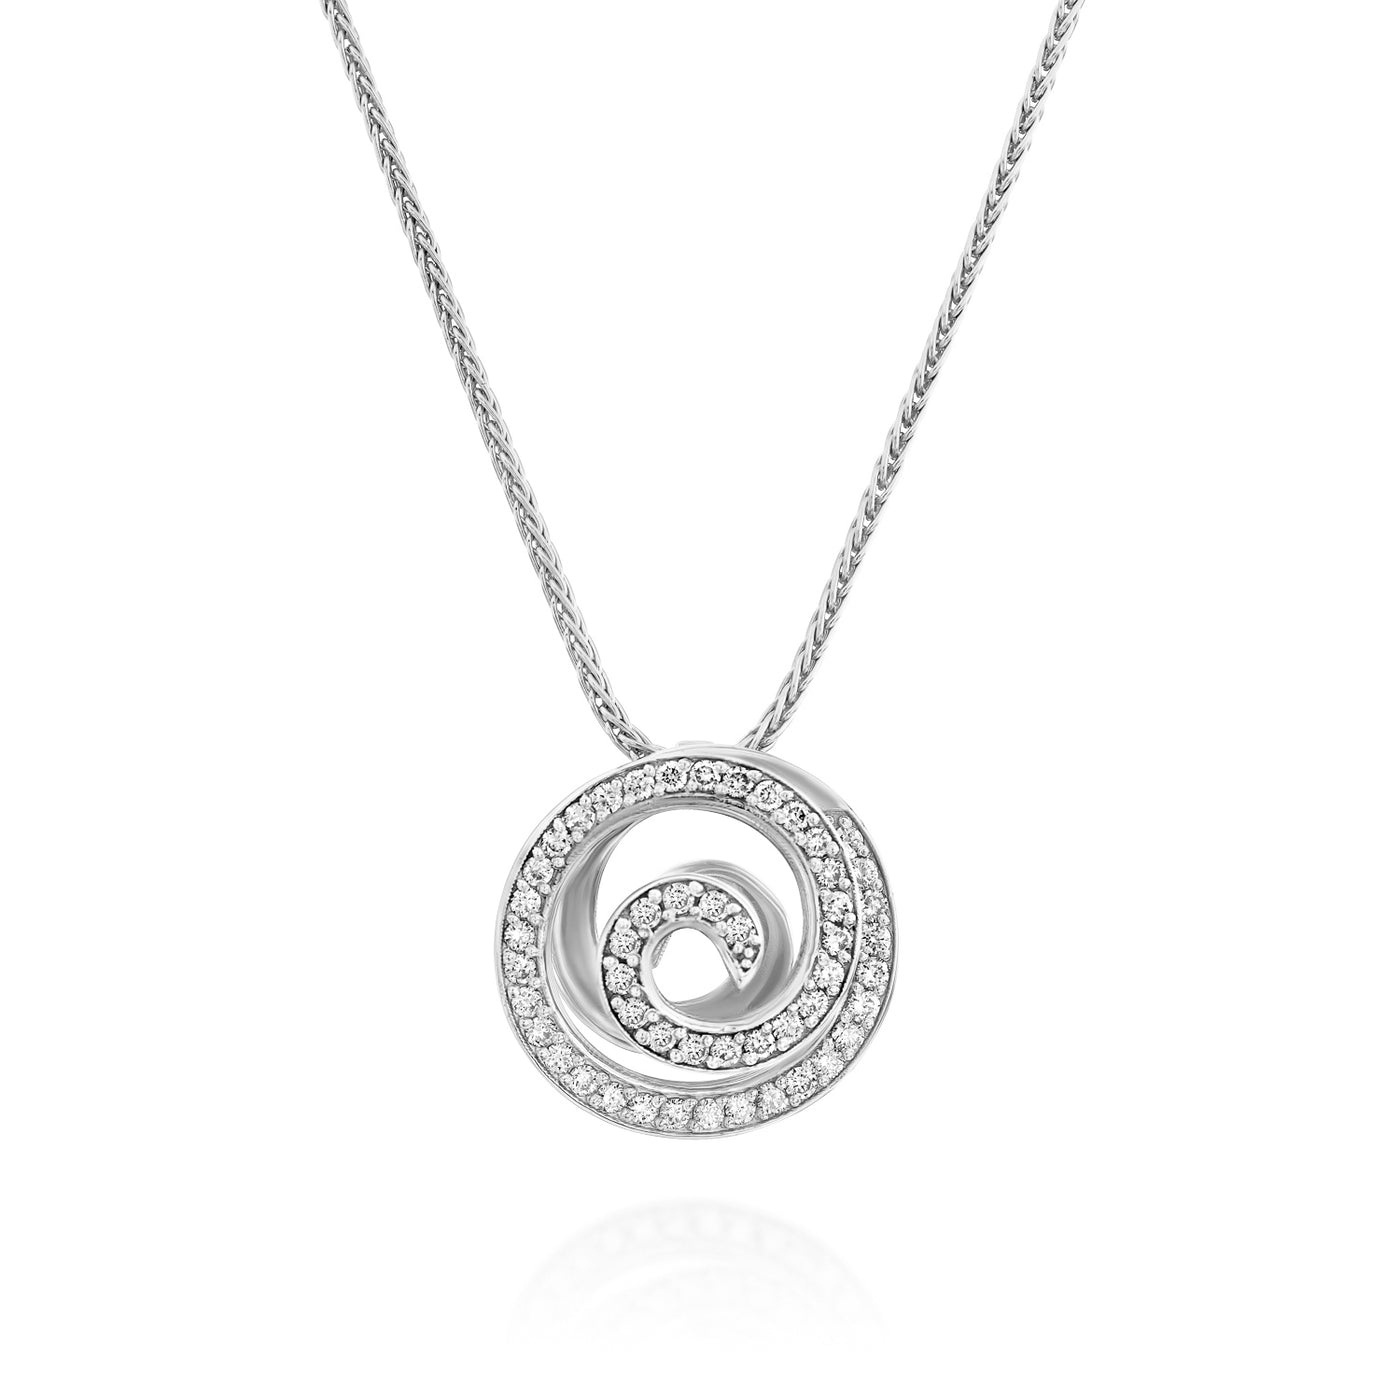 This is a unique Diamond long necklace, featuring a 14K gold spiral, pave set with white diamonds, the perfect swirl pendant.